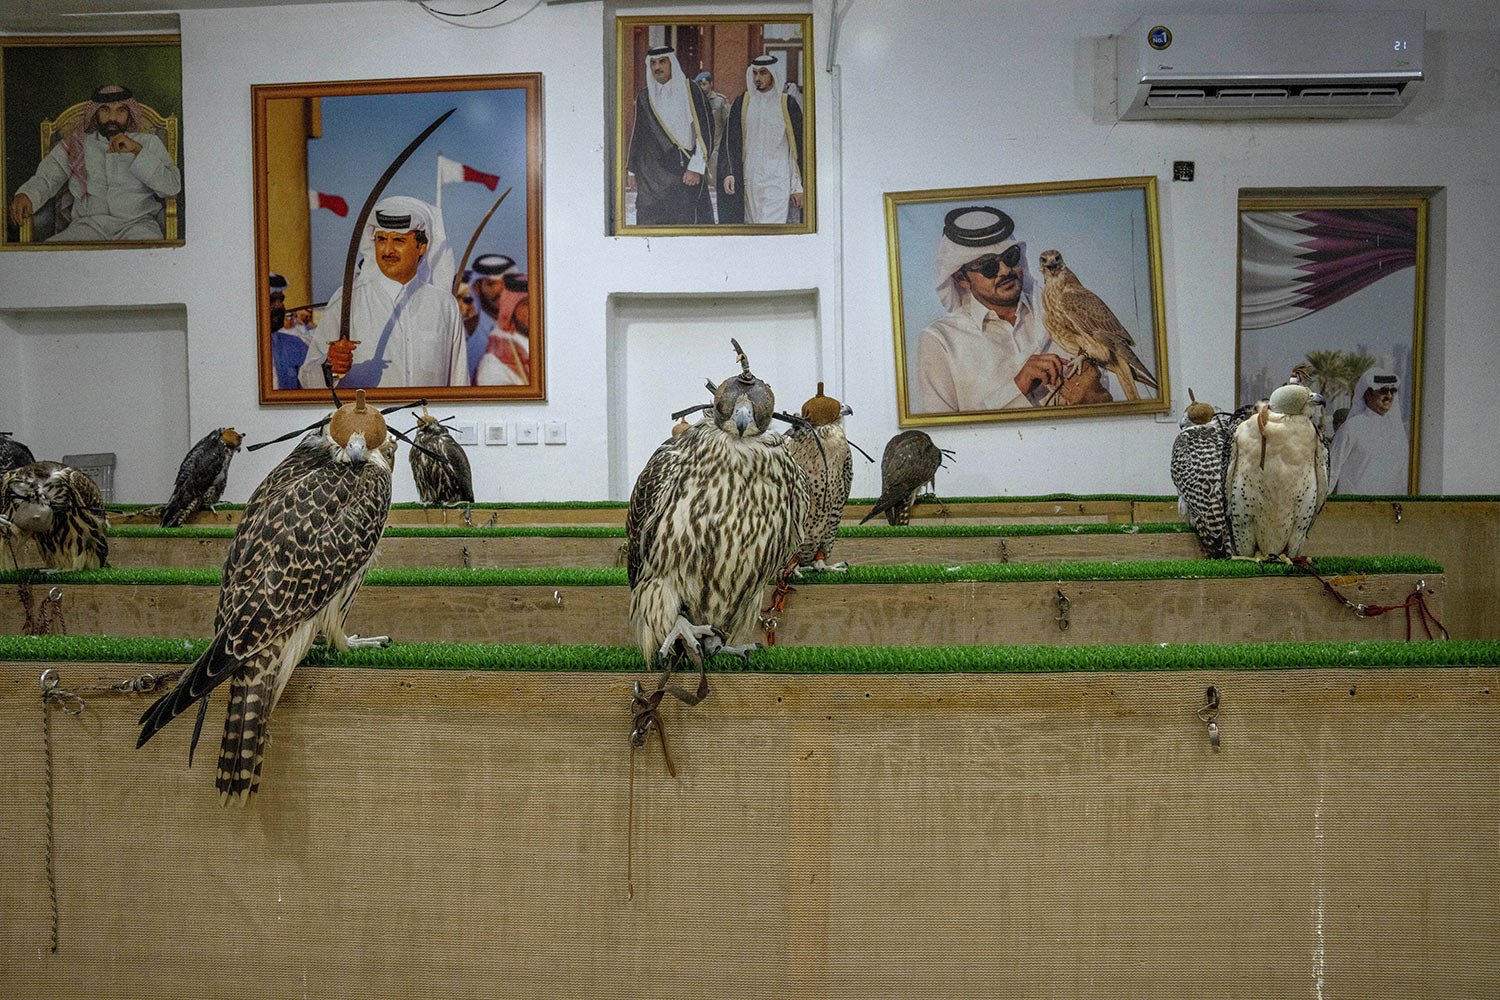  Falcons are displayed for sale at a shop in Souq Waqif, Doha, Qatar, Sunday, Oct. 16, 2022. Falconry is one of the oldest and prevalent sports in Qatari culture and heritage. (AP Photo/Nariman El-Mofty) 